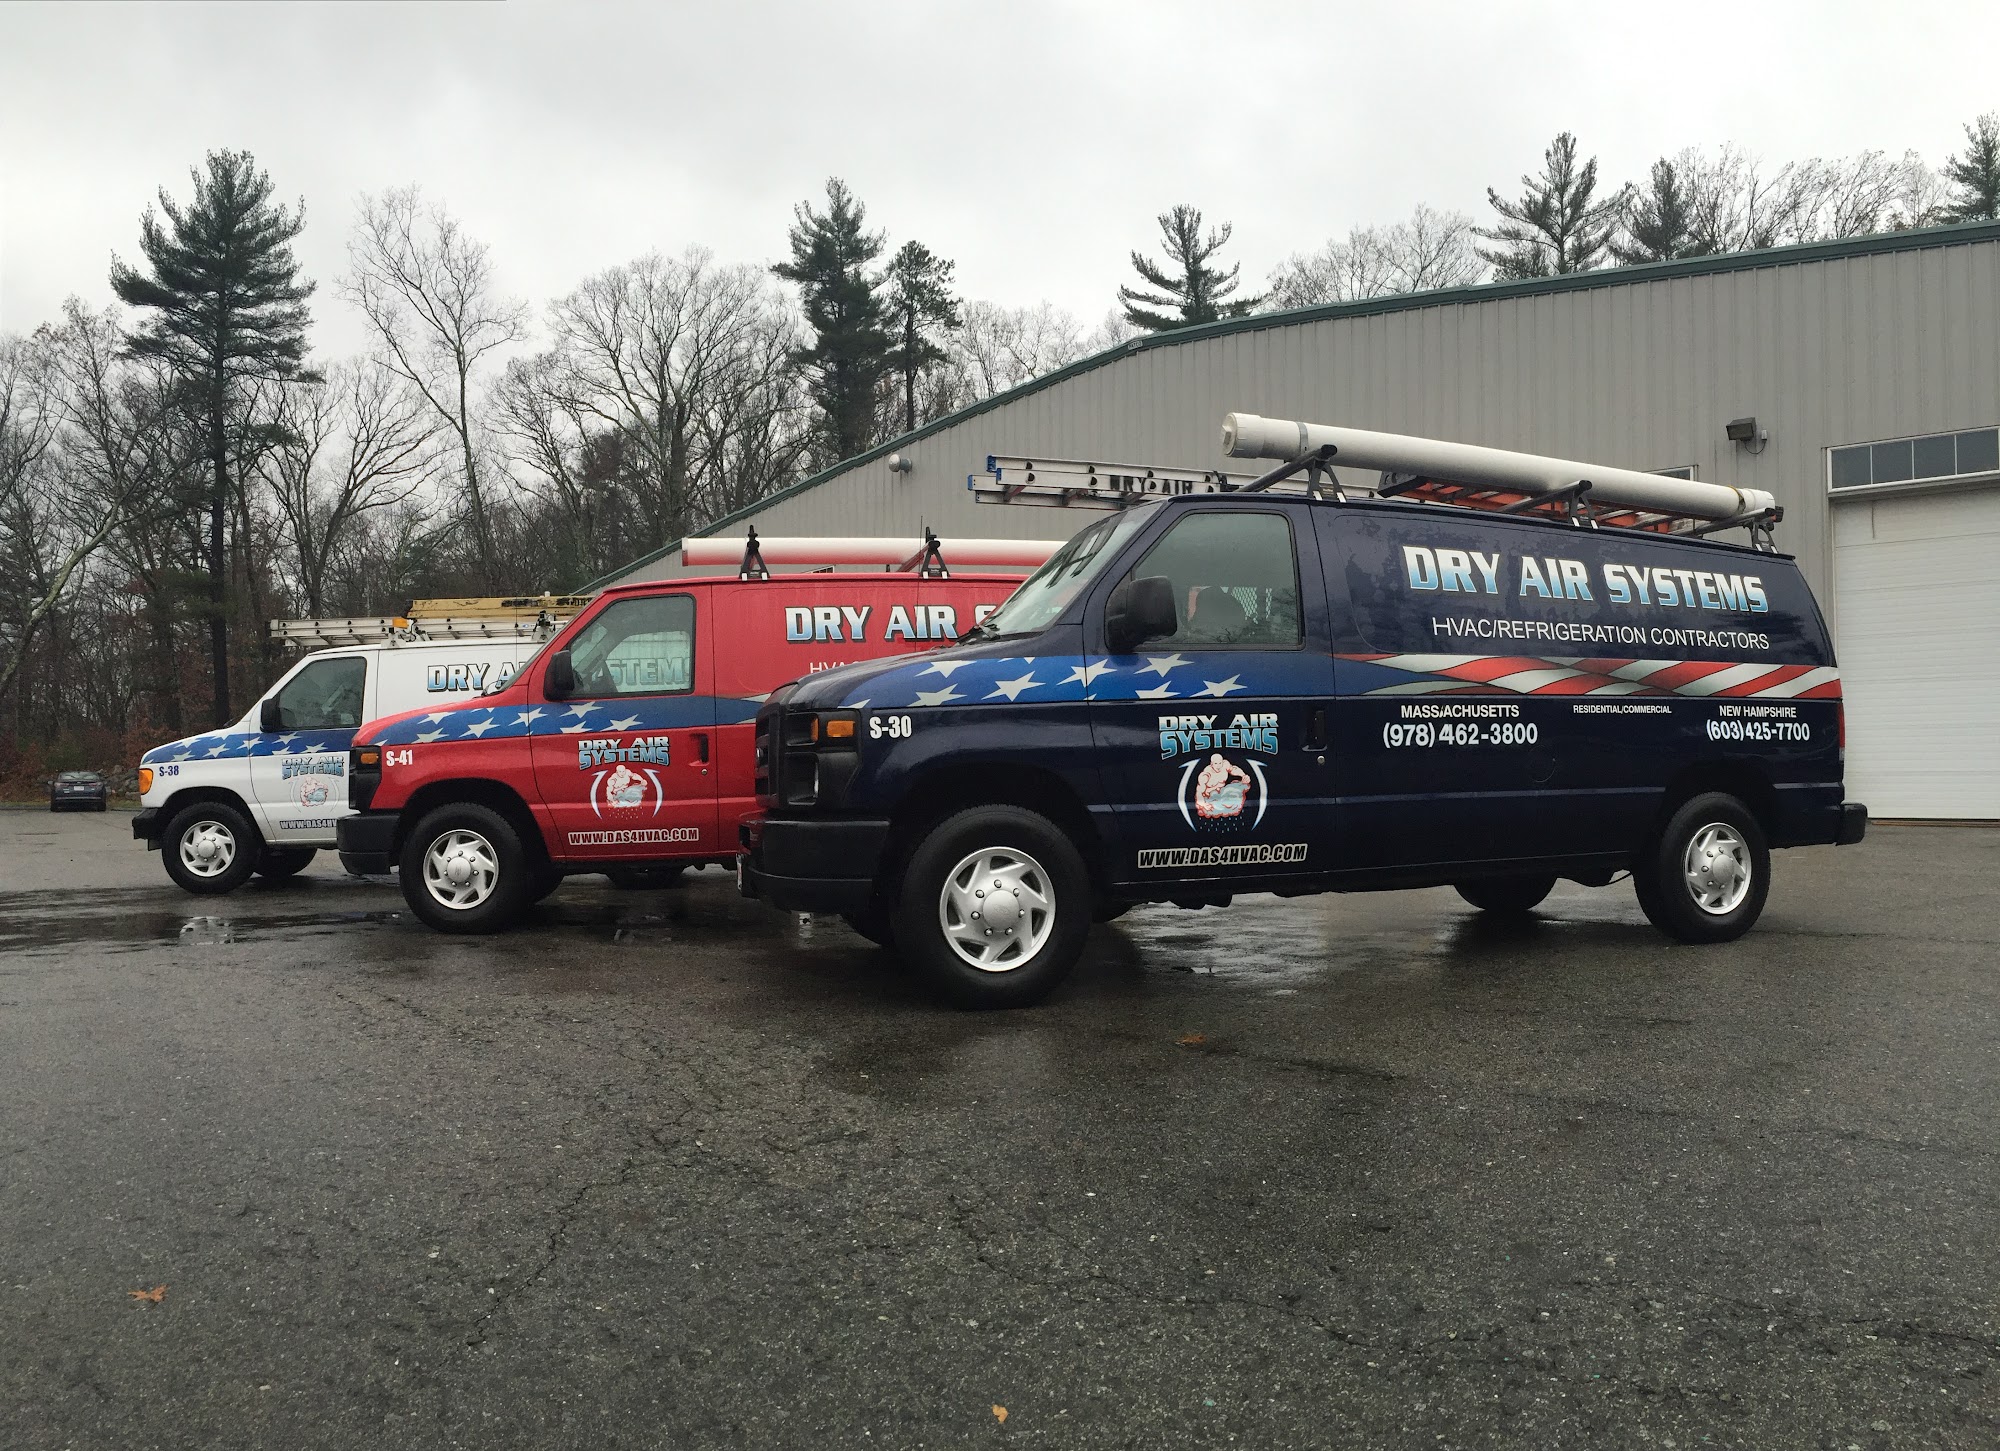 Dry Air Systems Inc, HVAC Contractors in Mass, NH & Maine 62 Forest Ridge Dr, Rowley Massachusetts 01969